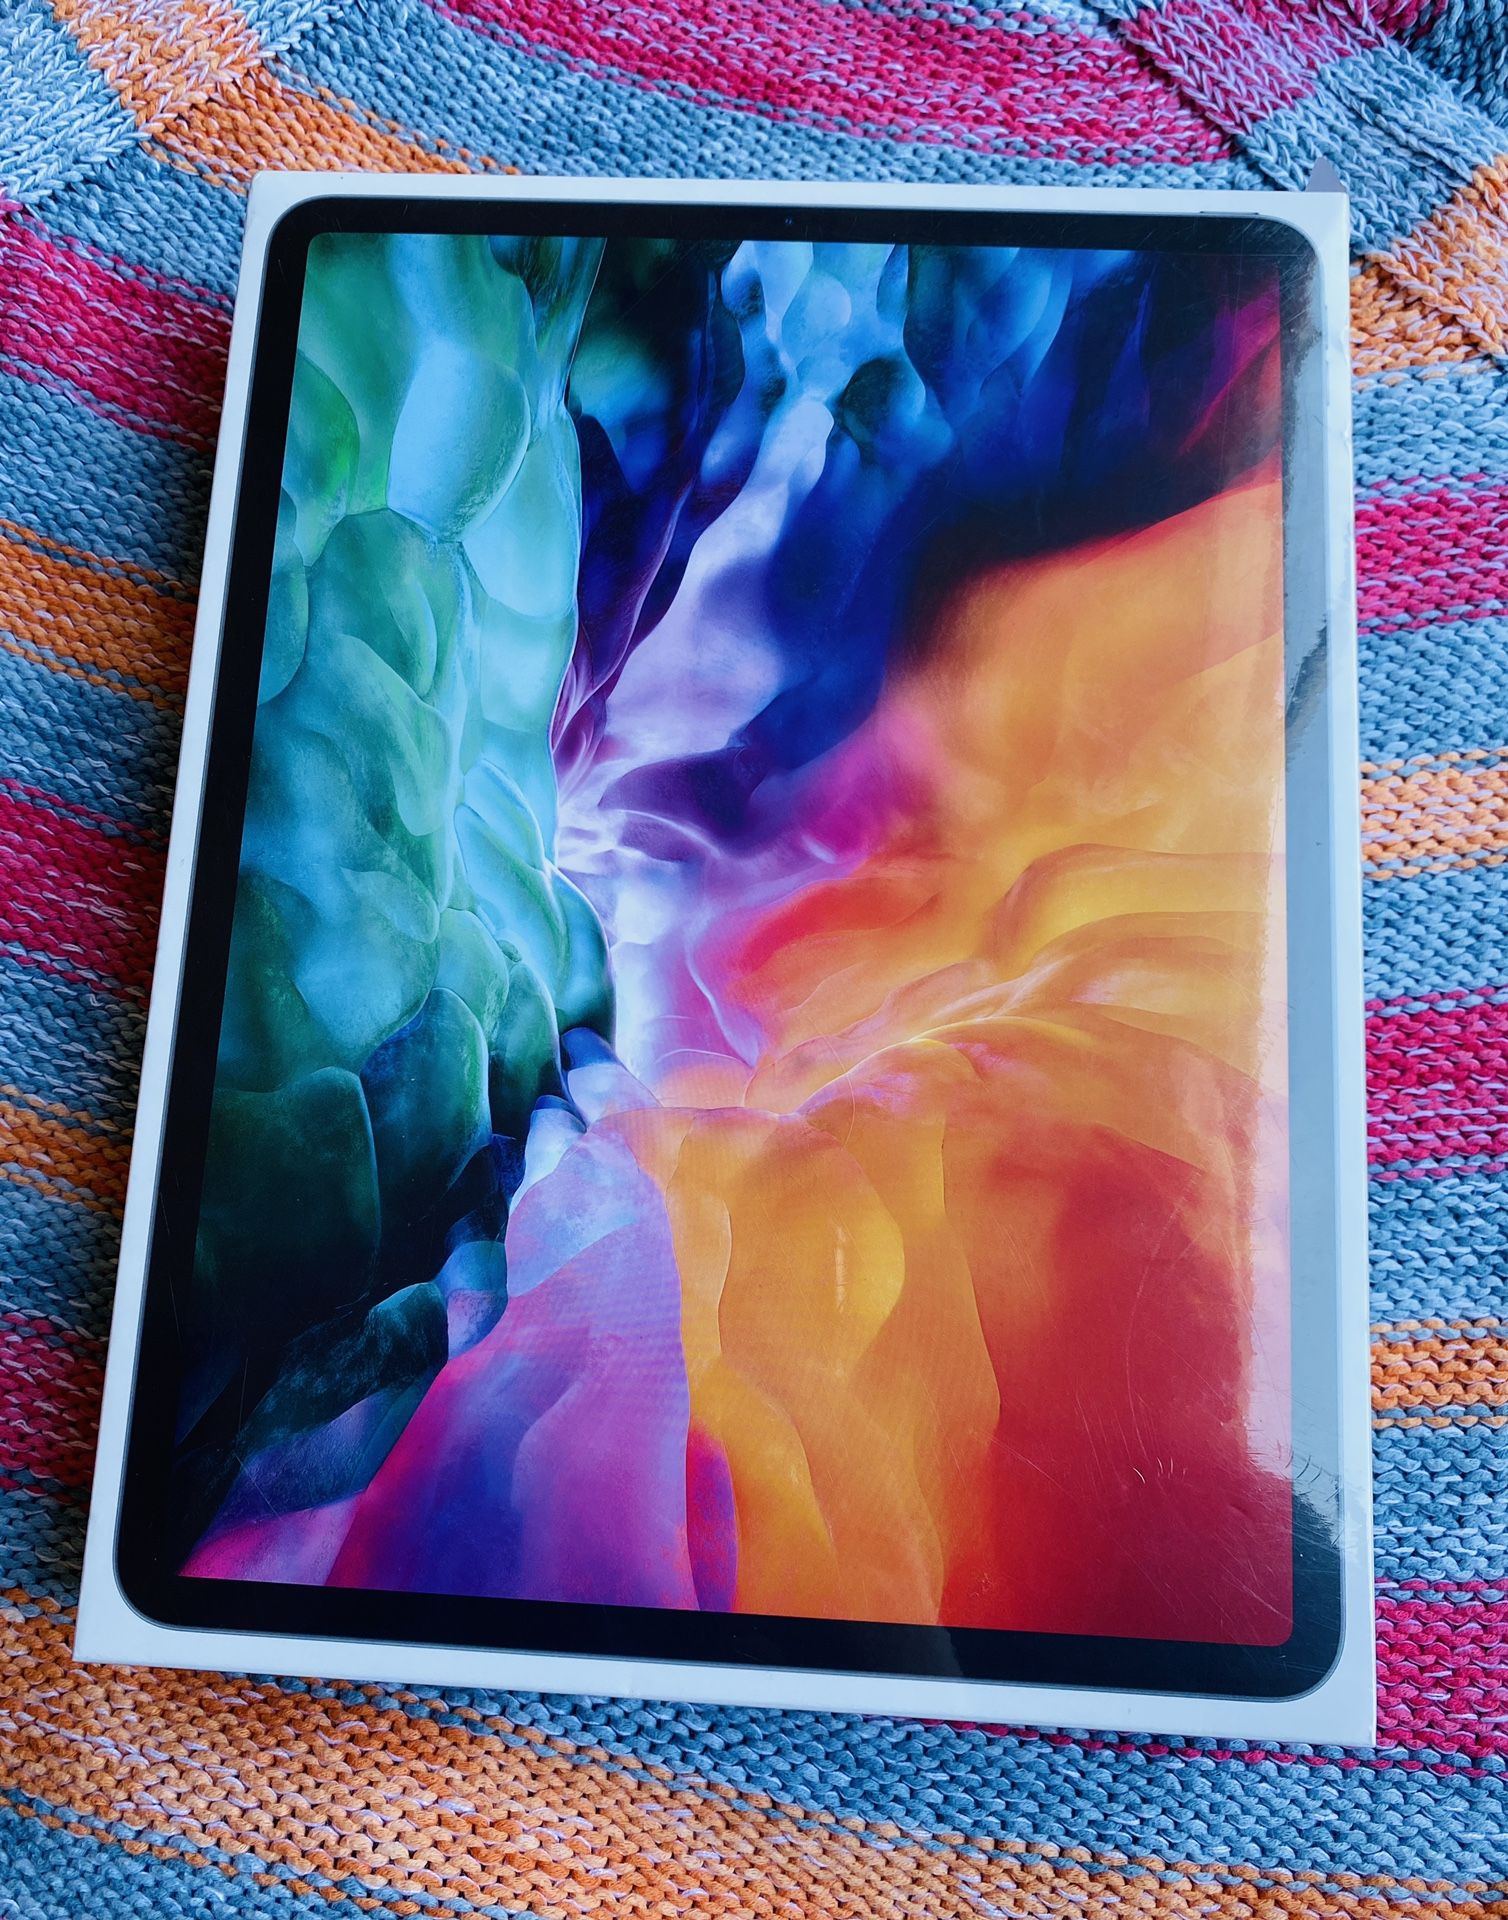 Apple 12.9" iPad Pro (Early 2020, 256GB, Wi-Fi Only, Space Gray)